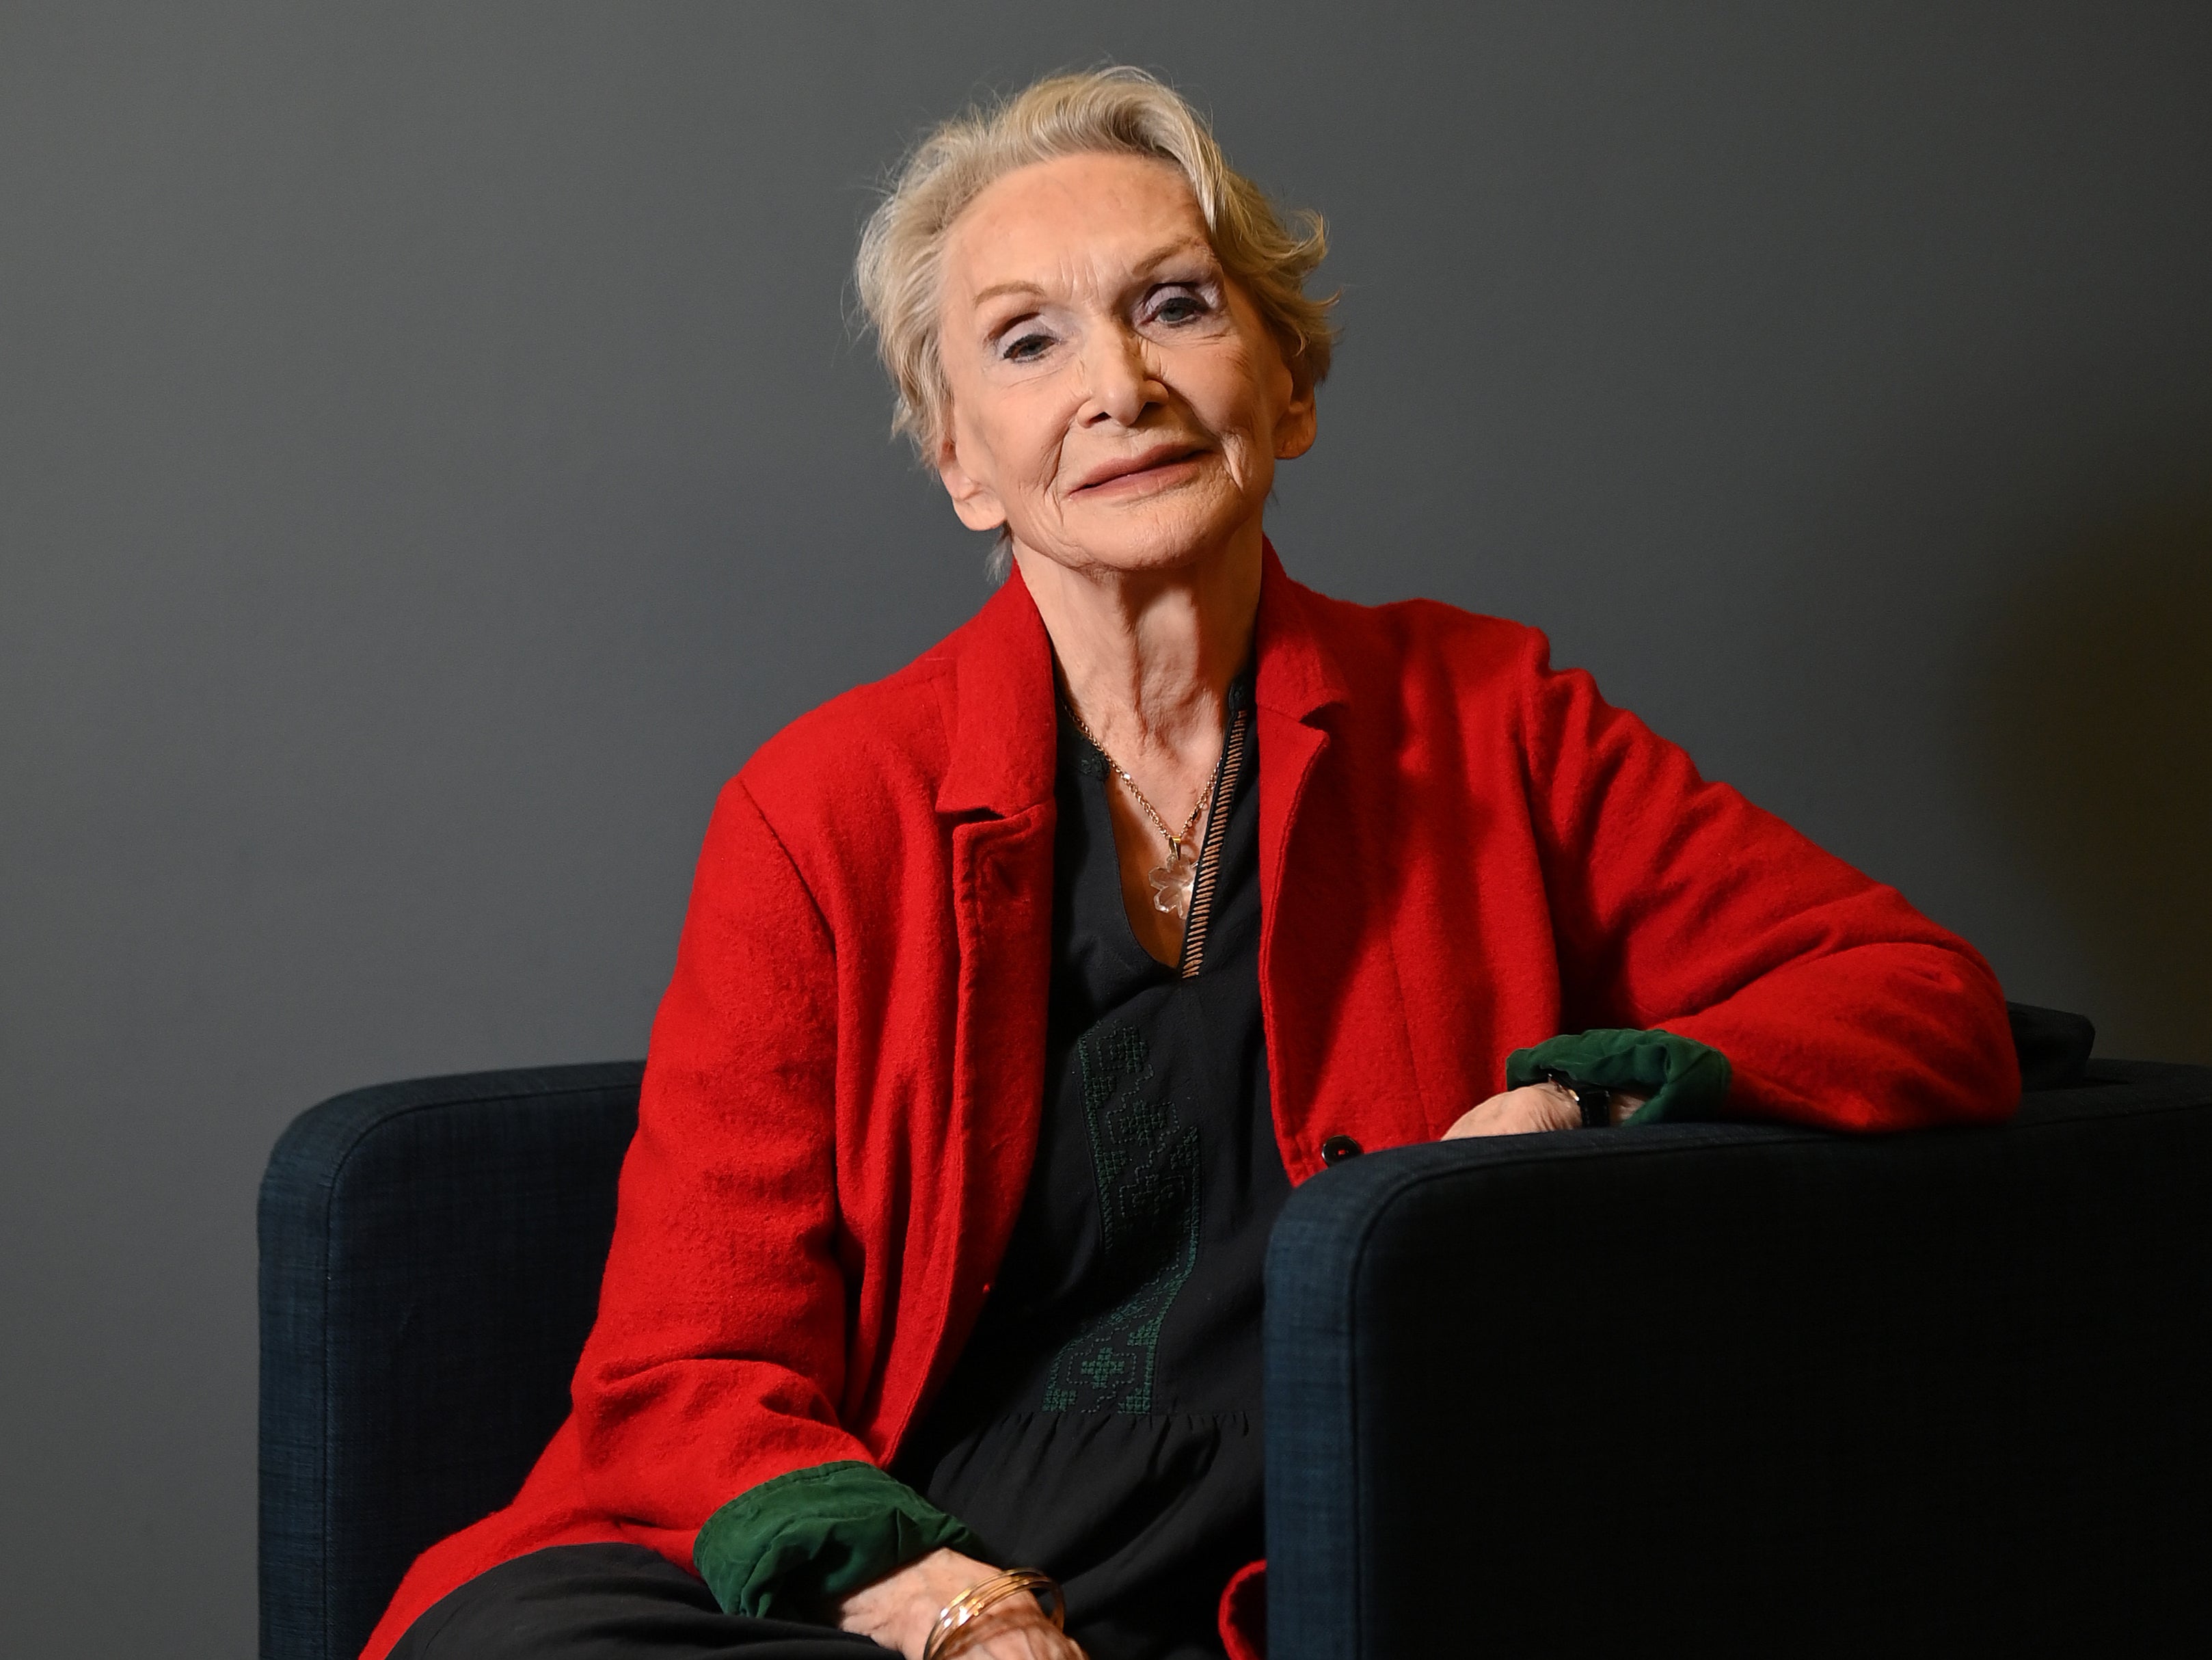 Sian Phillips attends the ‘I, Claudius’ screening at BFI Southbank on 13 November 2022